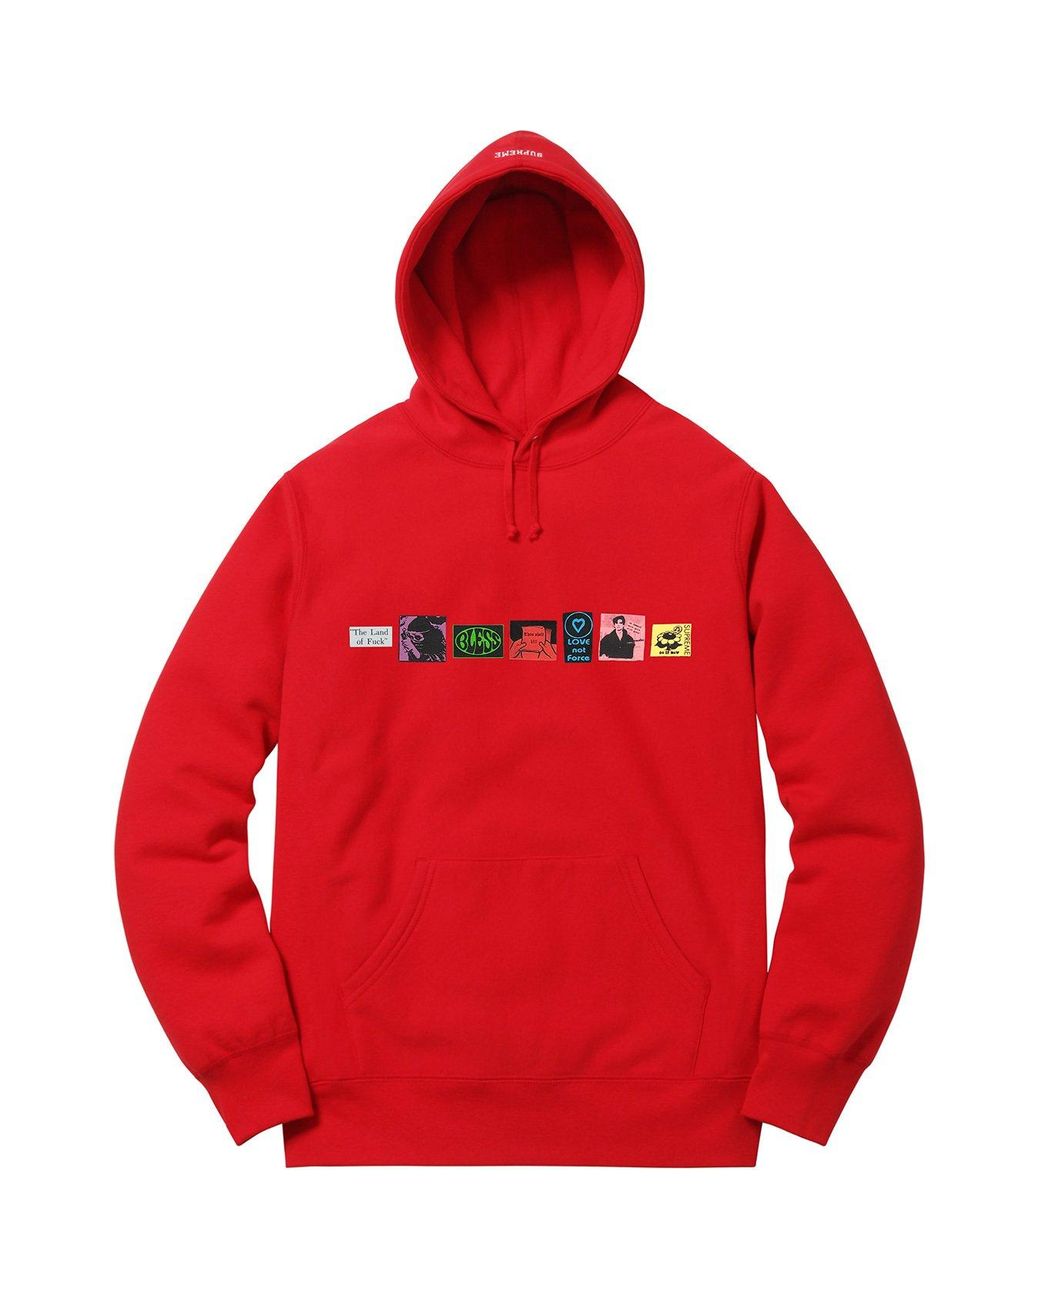 Supreme Bless Hooded Sweatshirt in Red for Men - Lyst